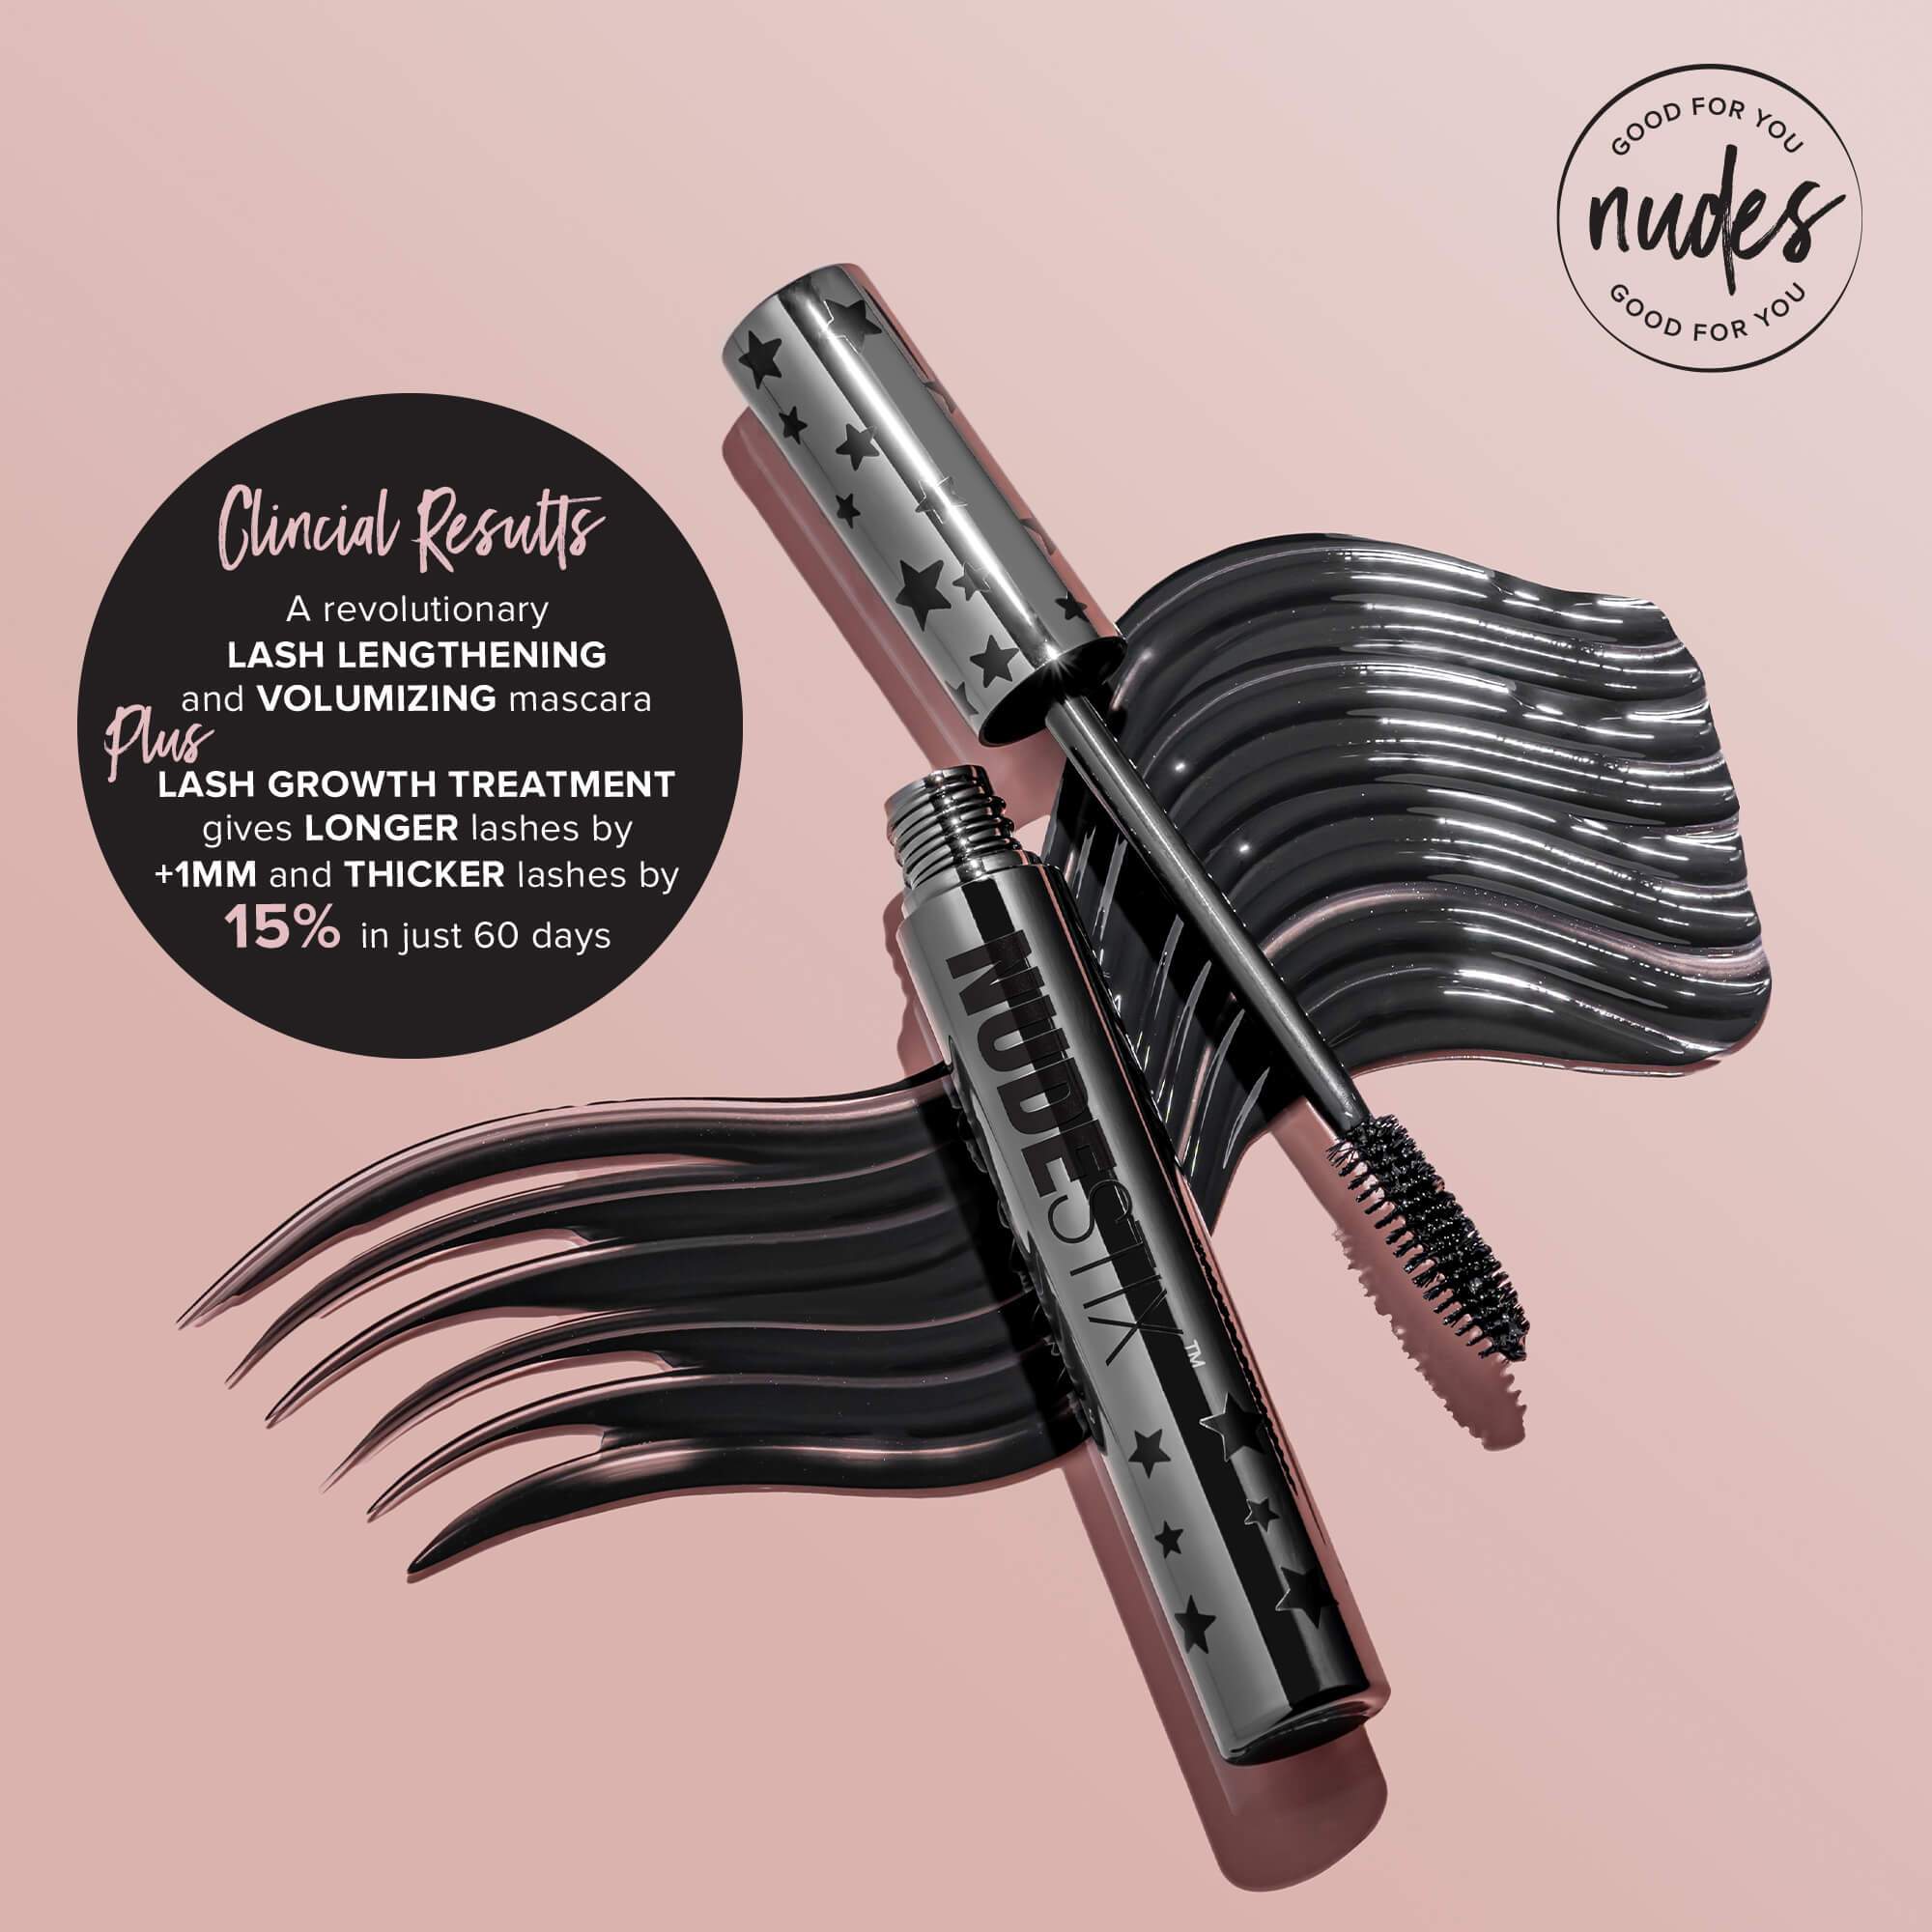 Your Nudestix Back To School Guide